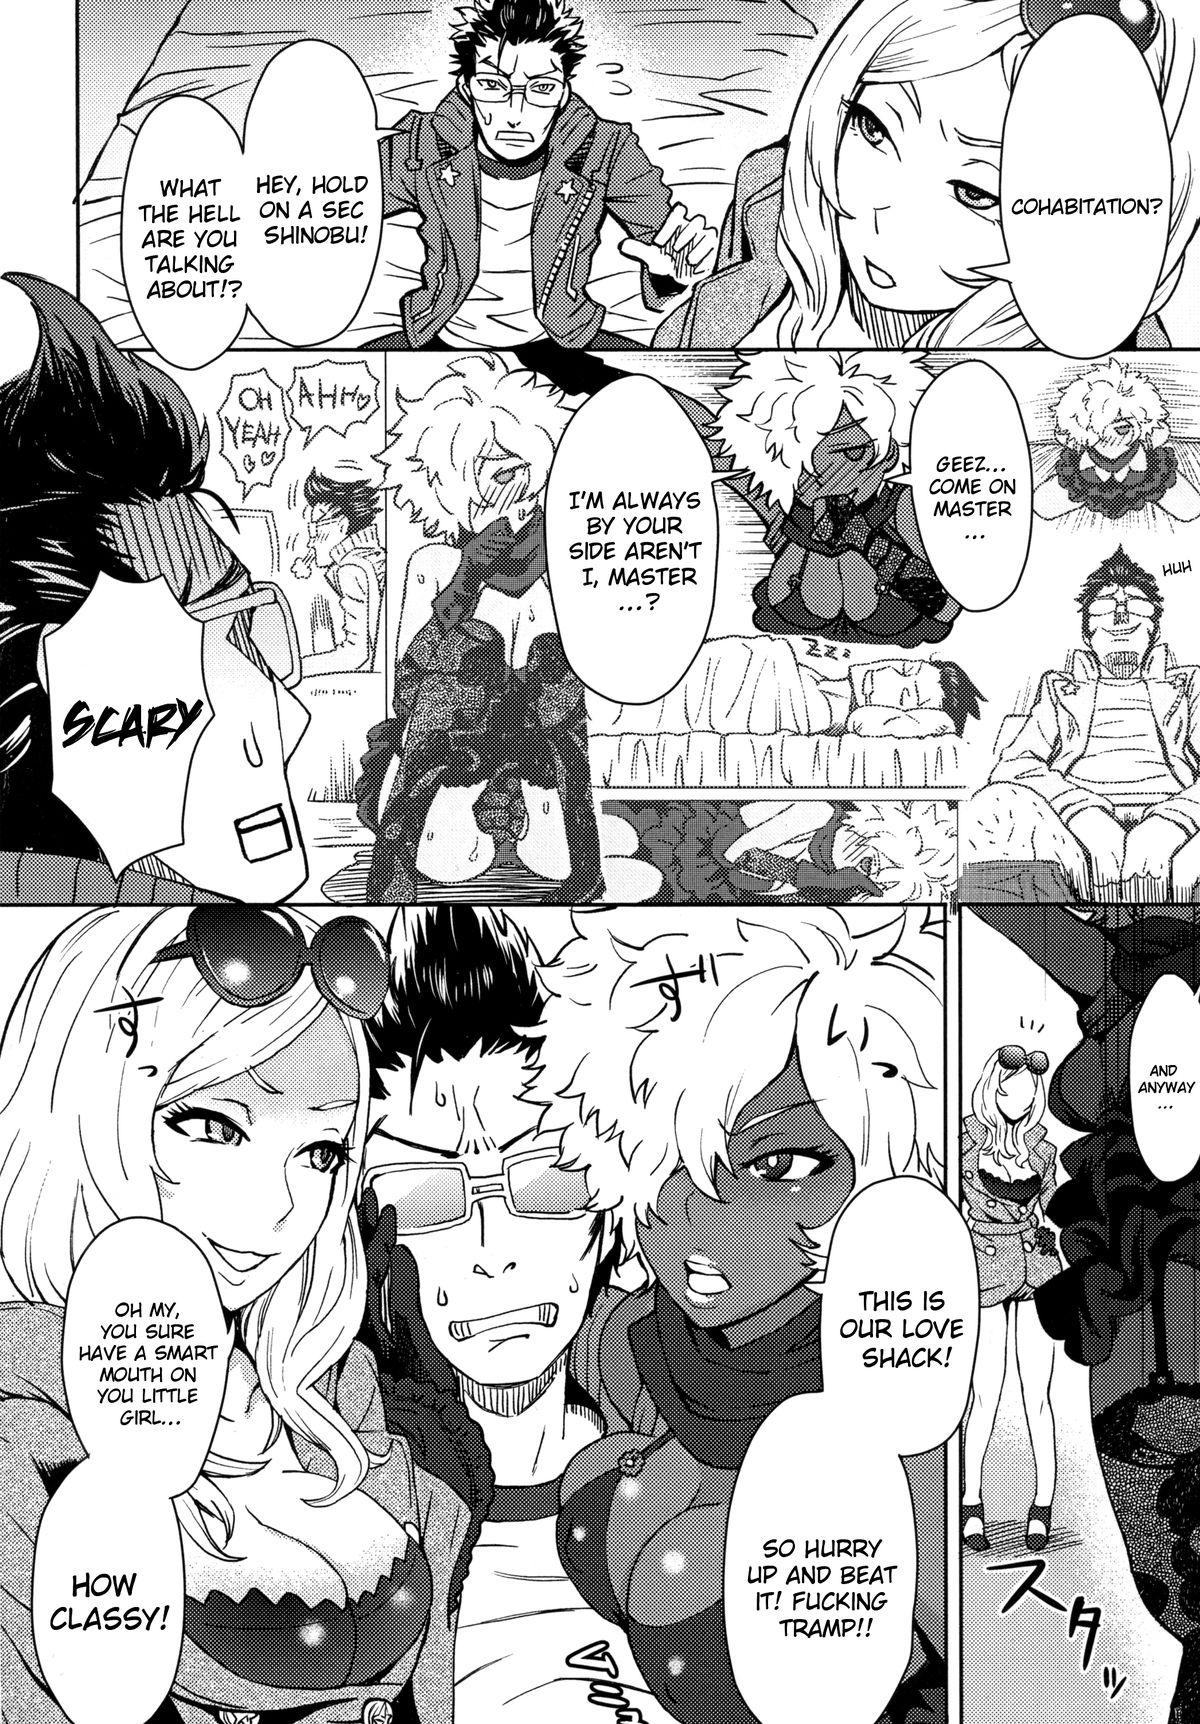 6 Of 25 no more heroes hentai haven, NO MORE HEROINES 2 Page 6 Of 25 no...